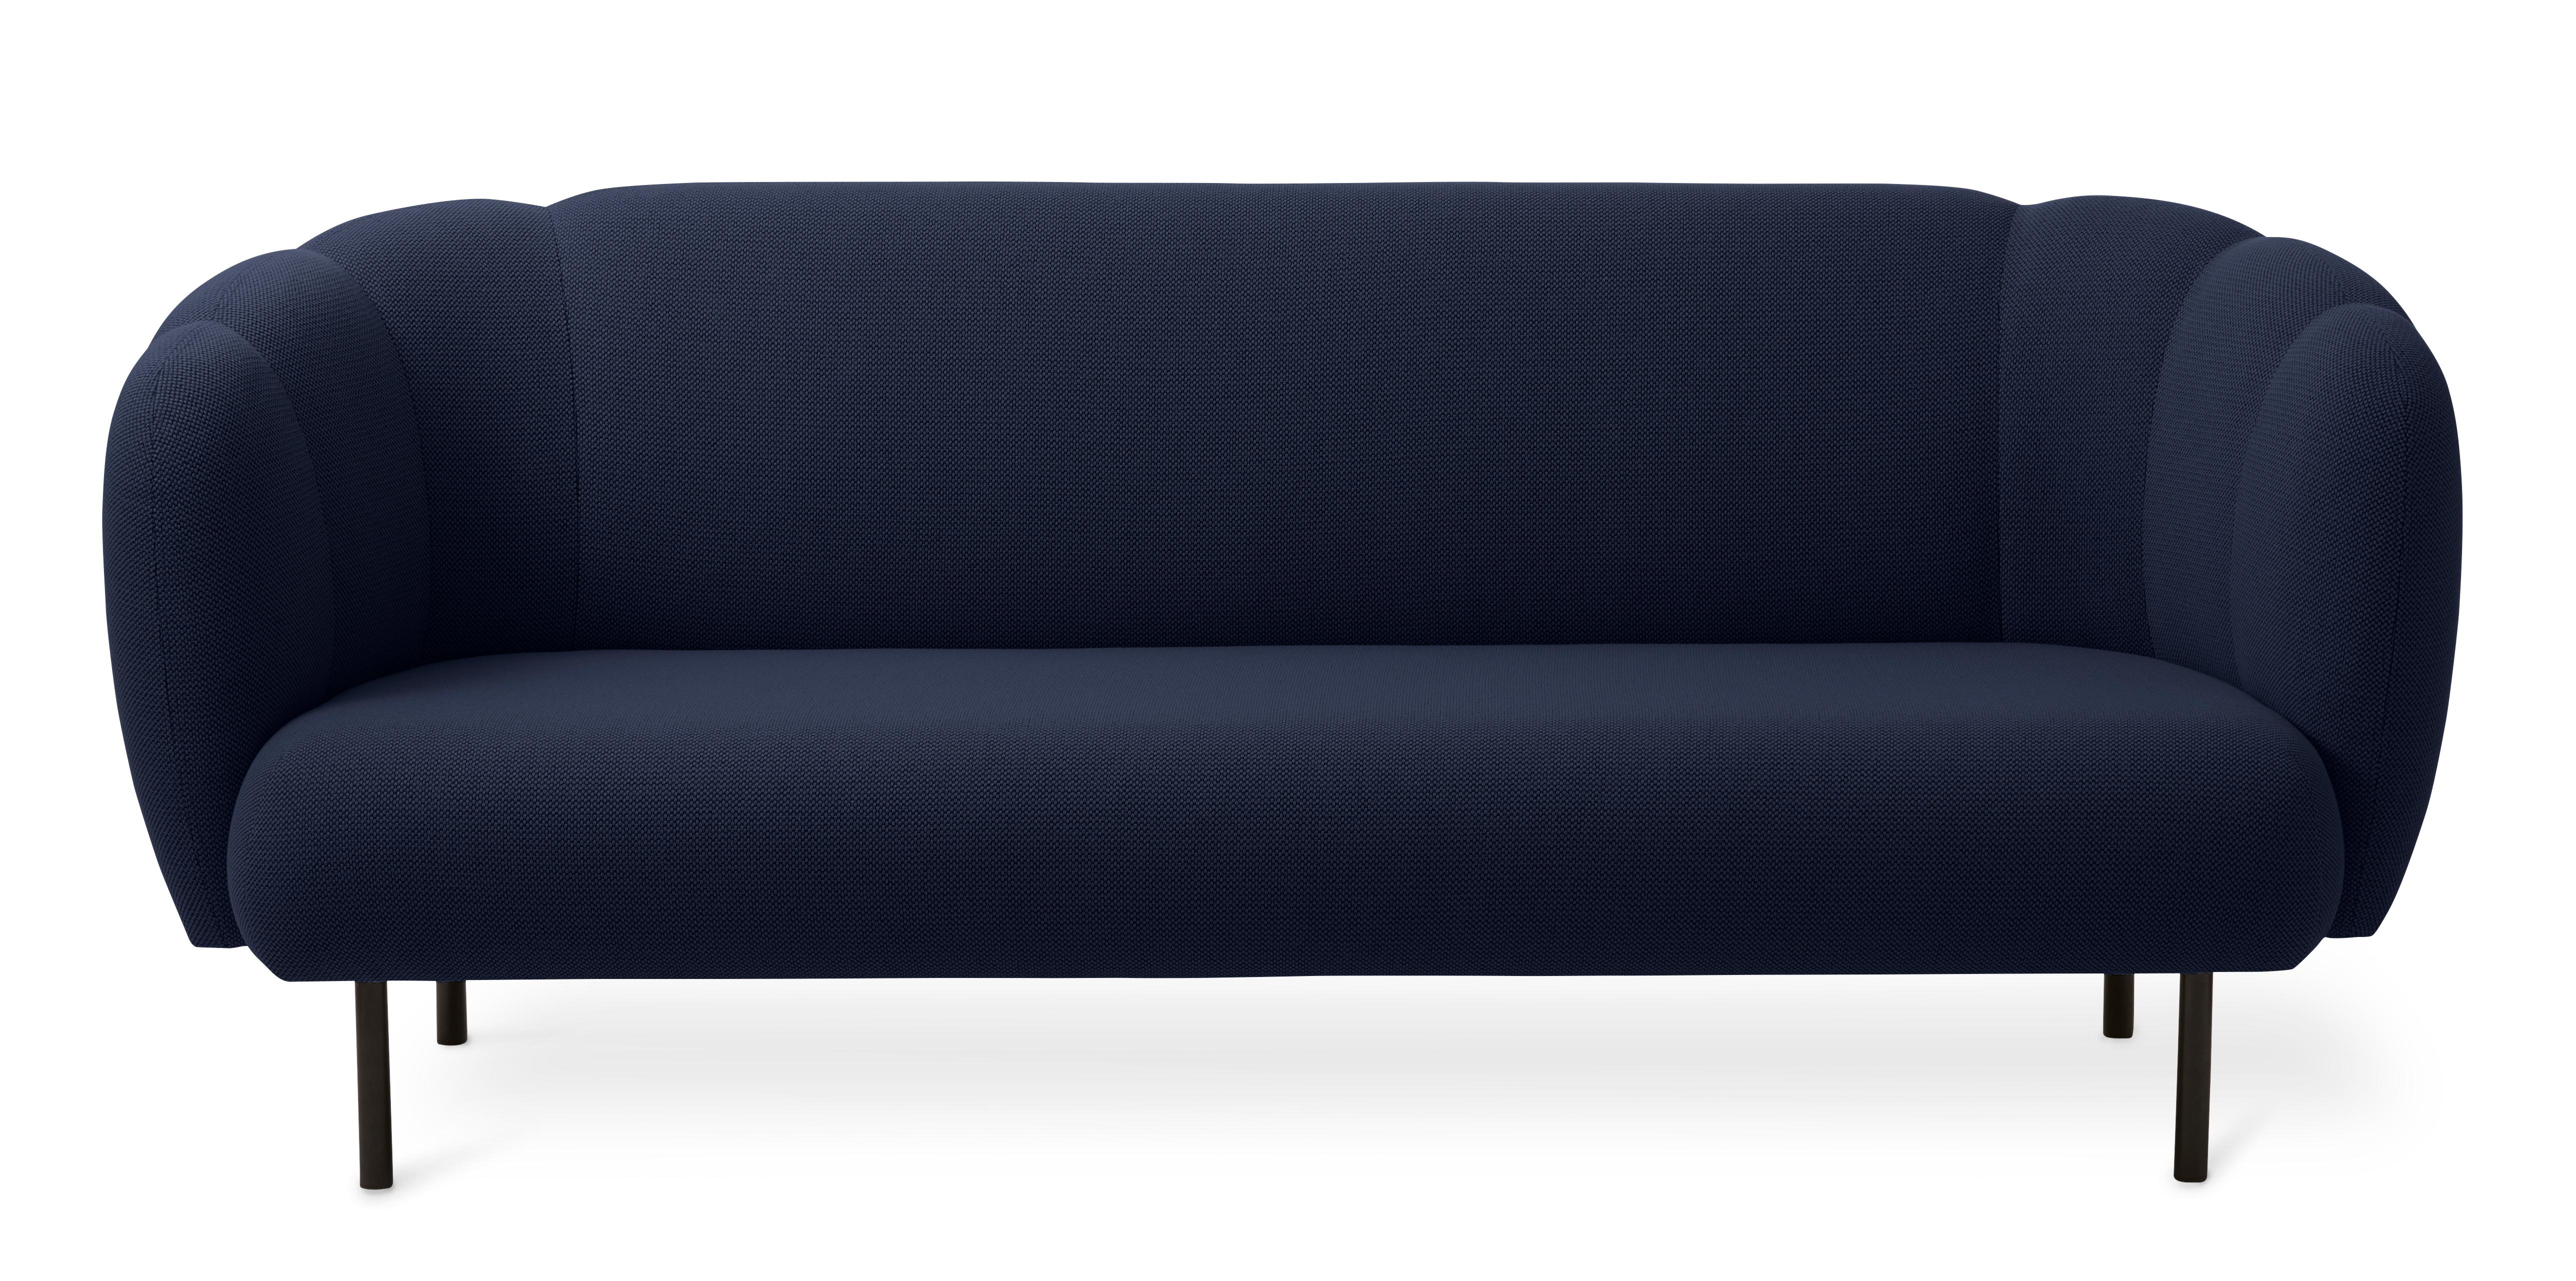 For Sale: Blue (Merit 005) Cape 3-Seat Stitch Sofa, by Charlotte Høncke from Warm Nordic